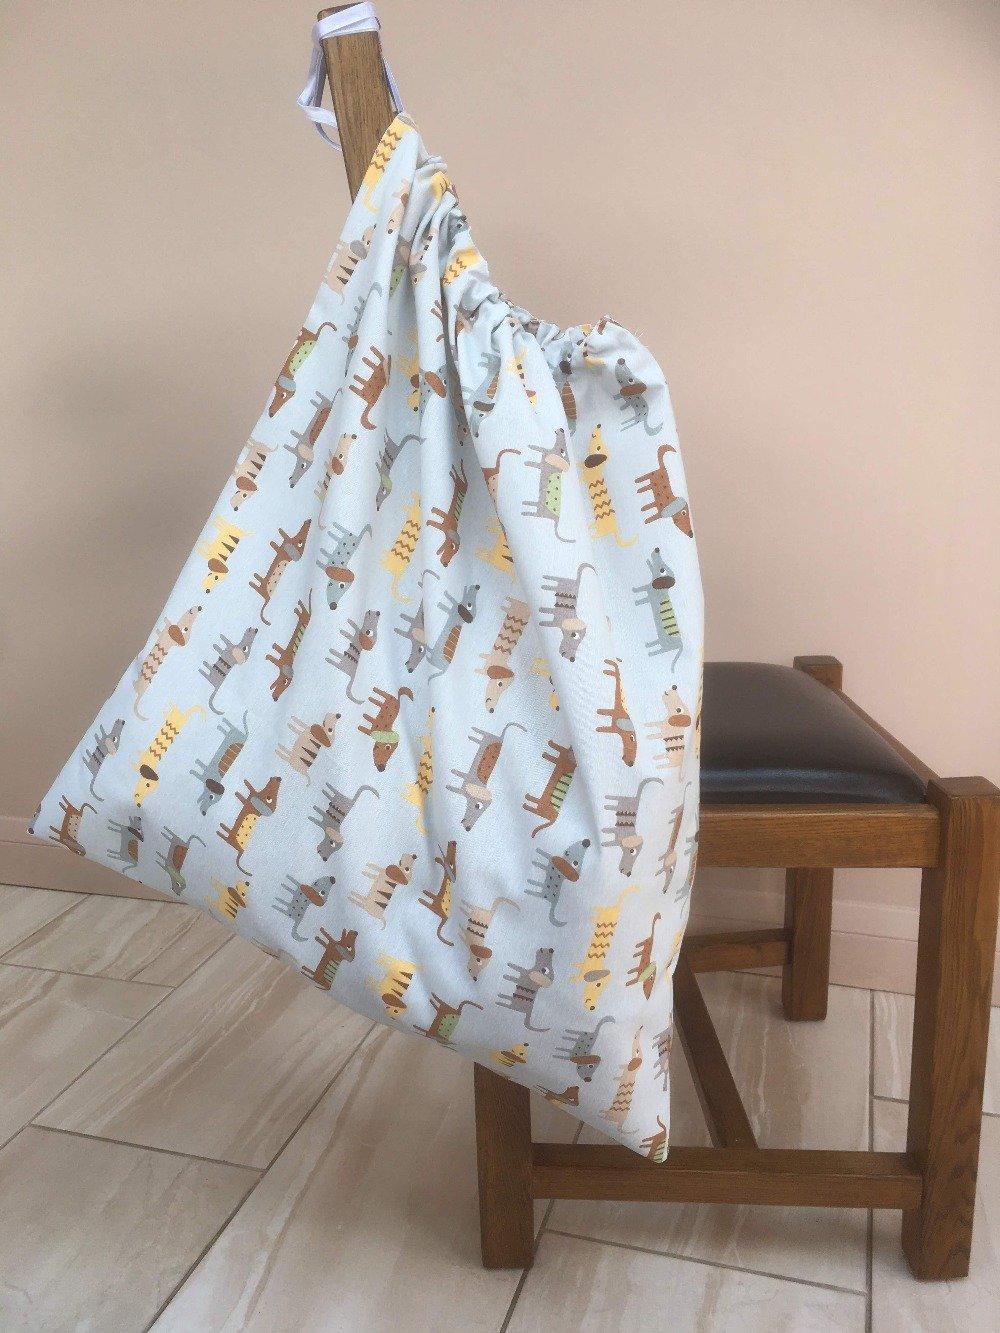 Large drawstring washbag for uniforms to avoid infection from Covid etc Sausage Dog design